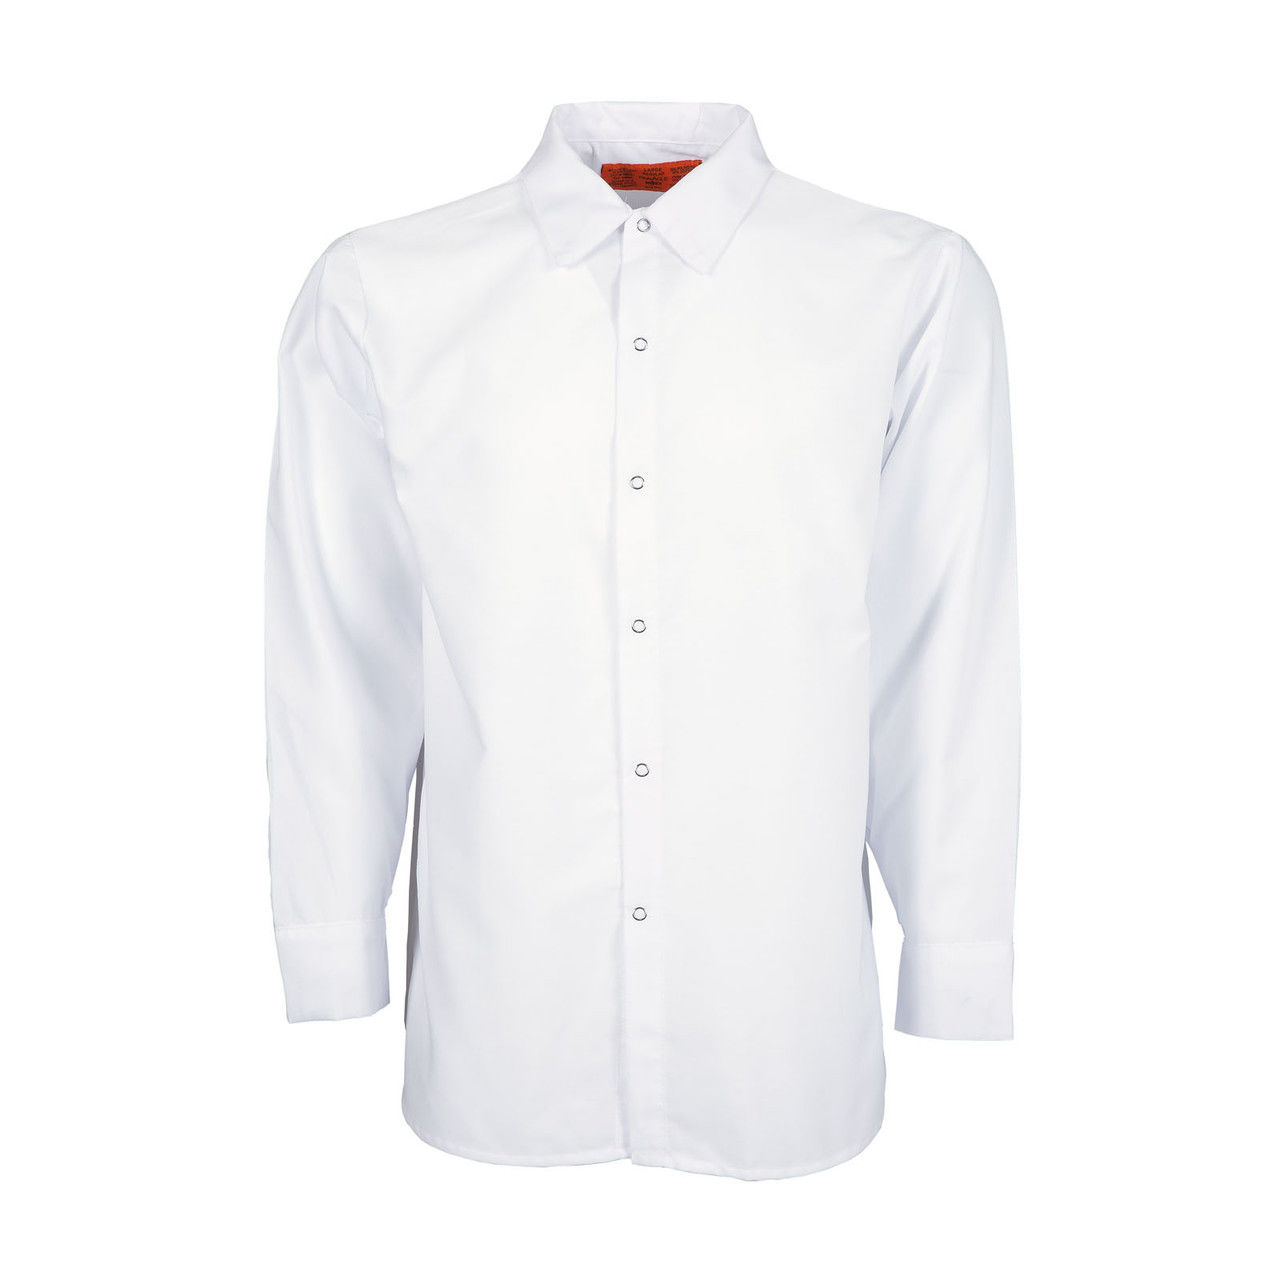 What's special about the buttons on white work shirts mens?